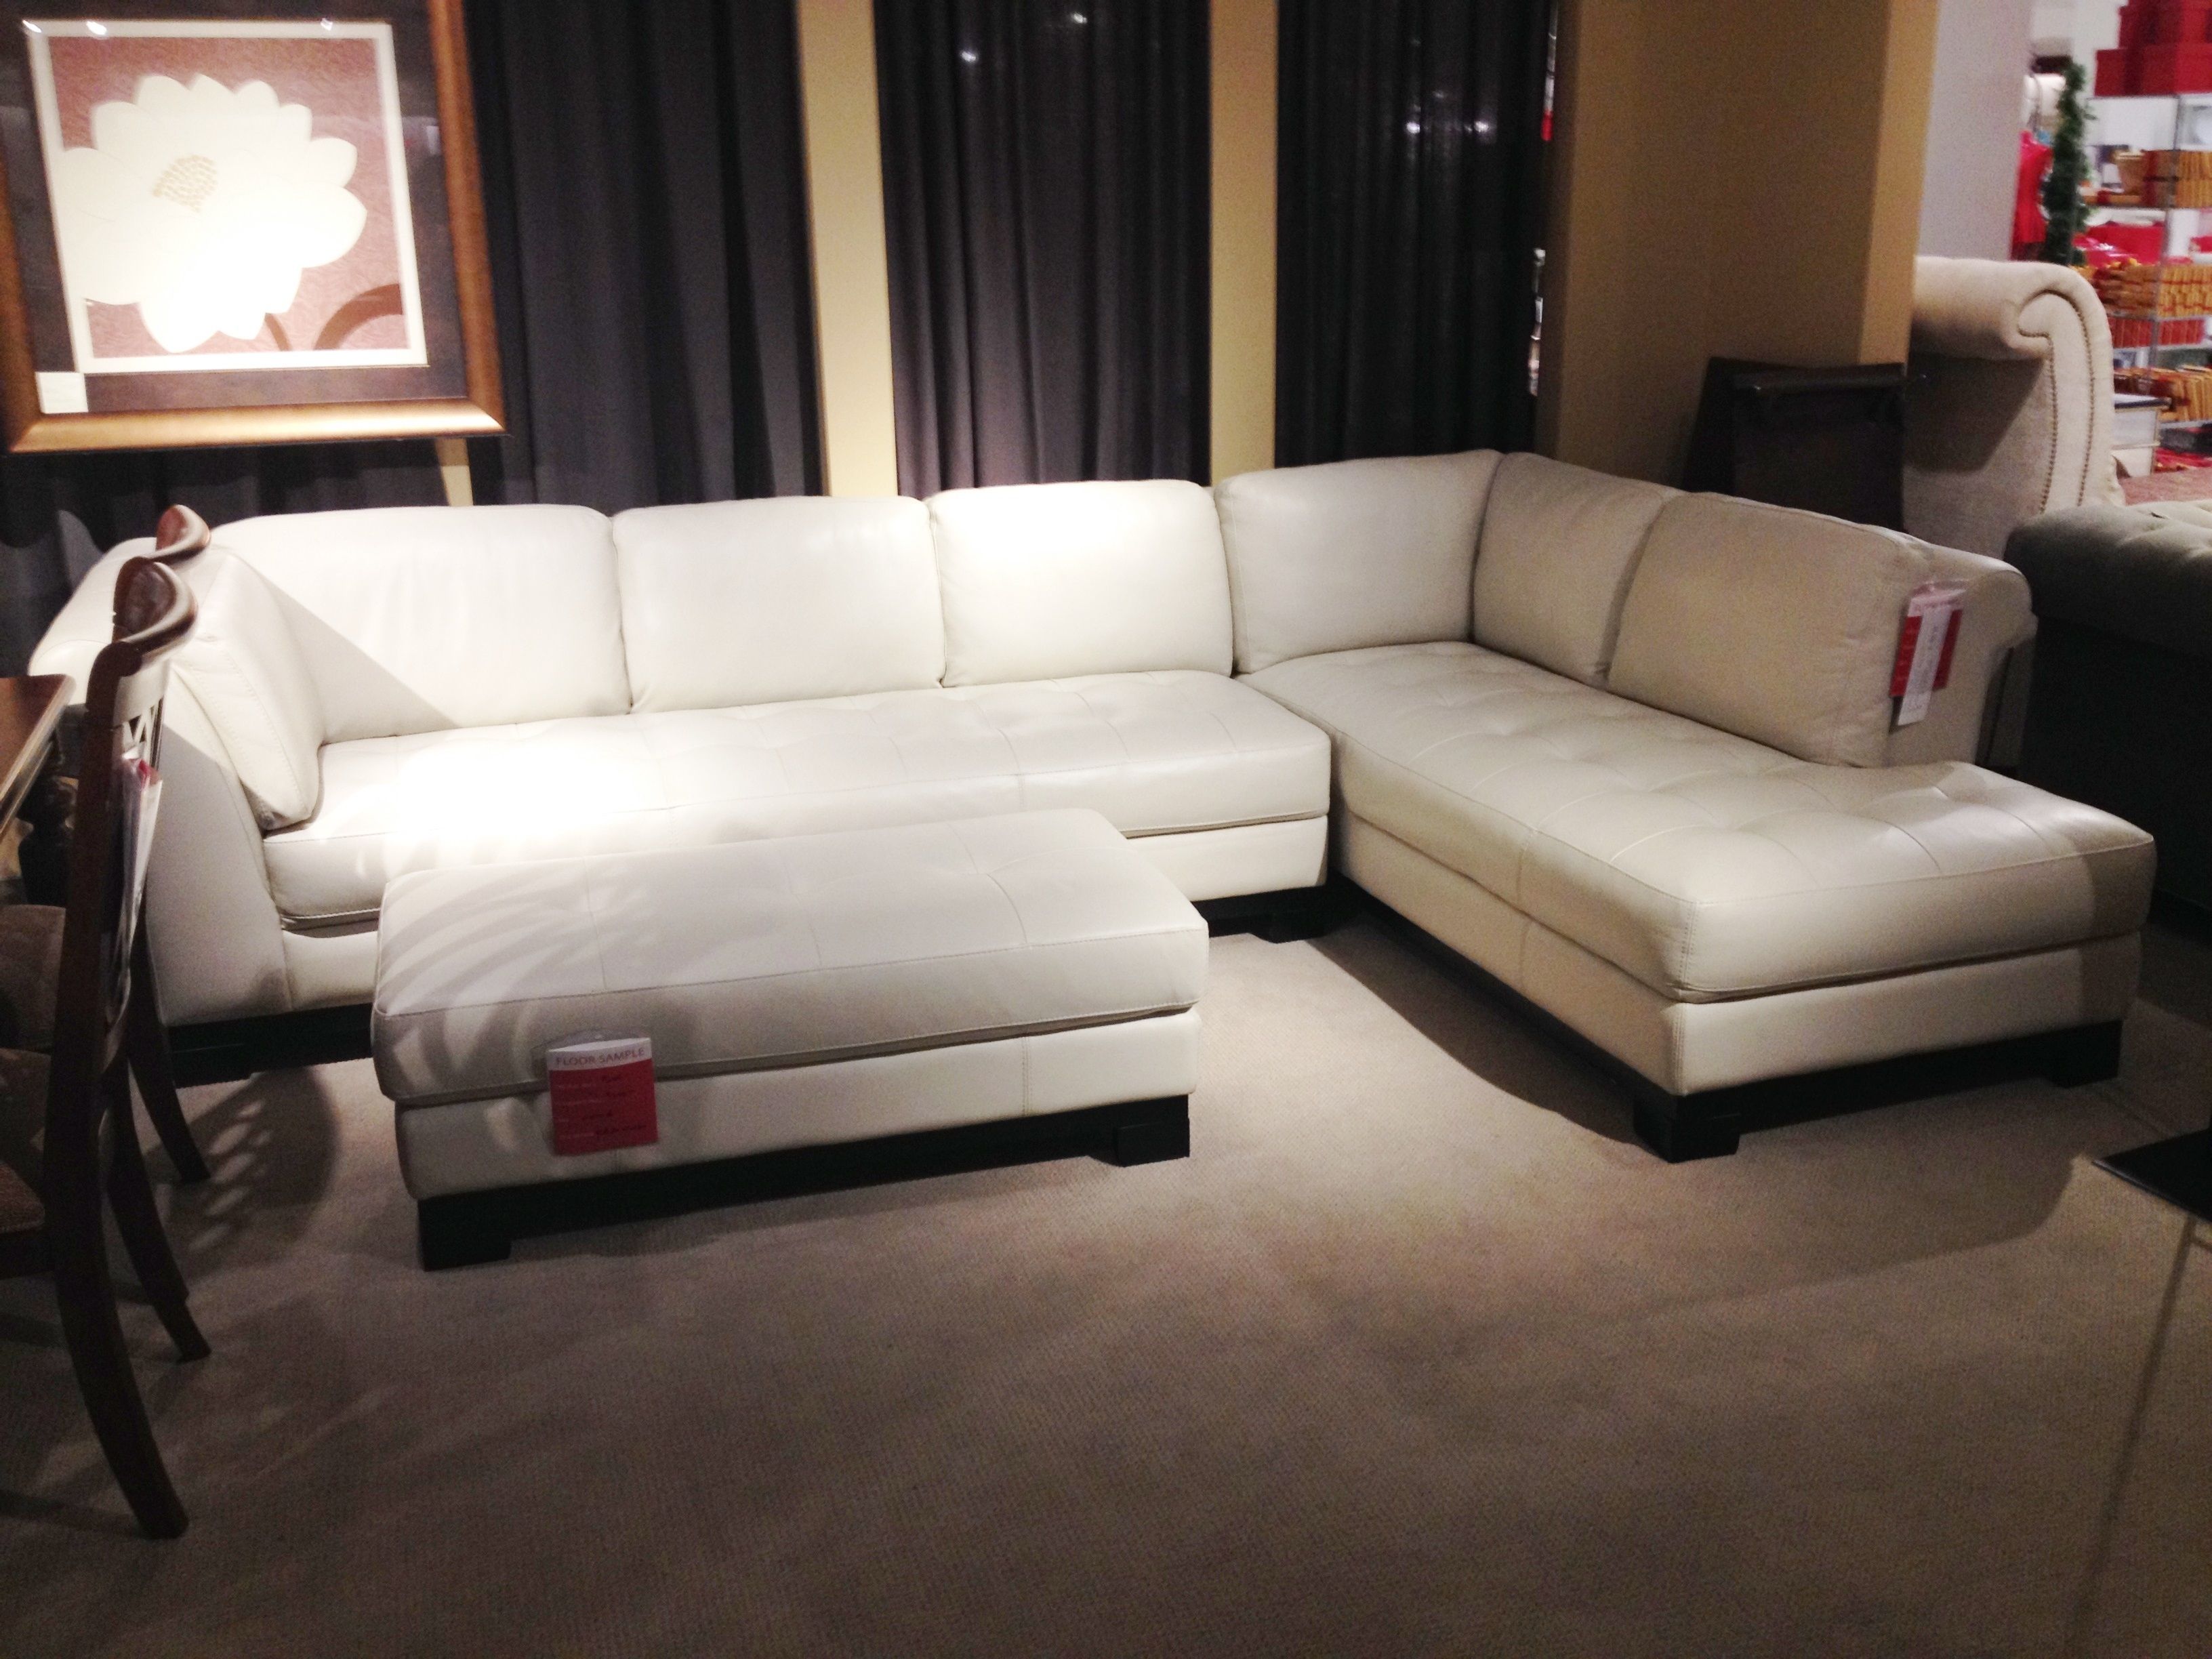 White Leather Sectional Sofa Macy's • Sectional Sofa Regarding Macys Leather Sectional Sofas (View 2 of 10)